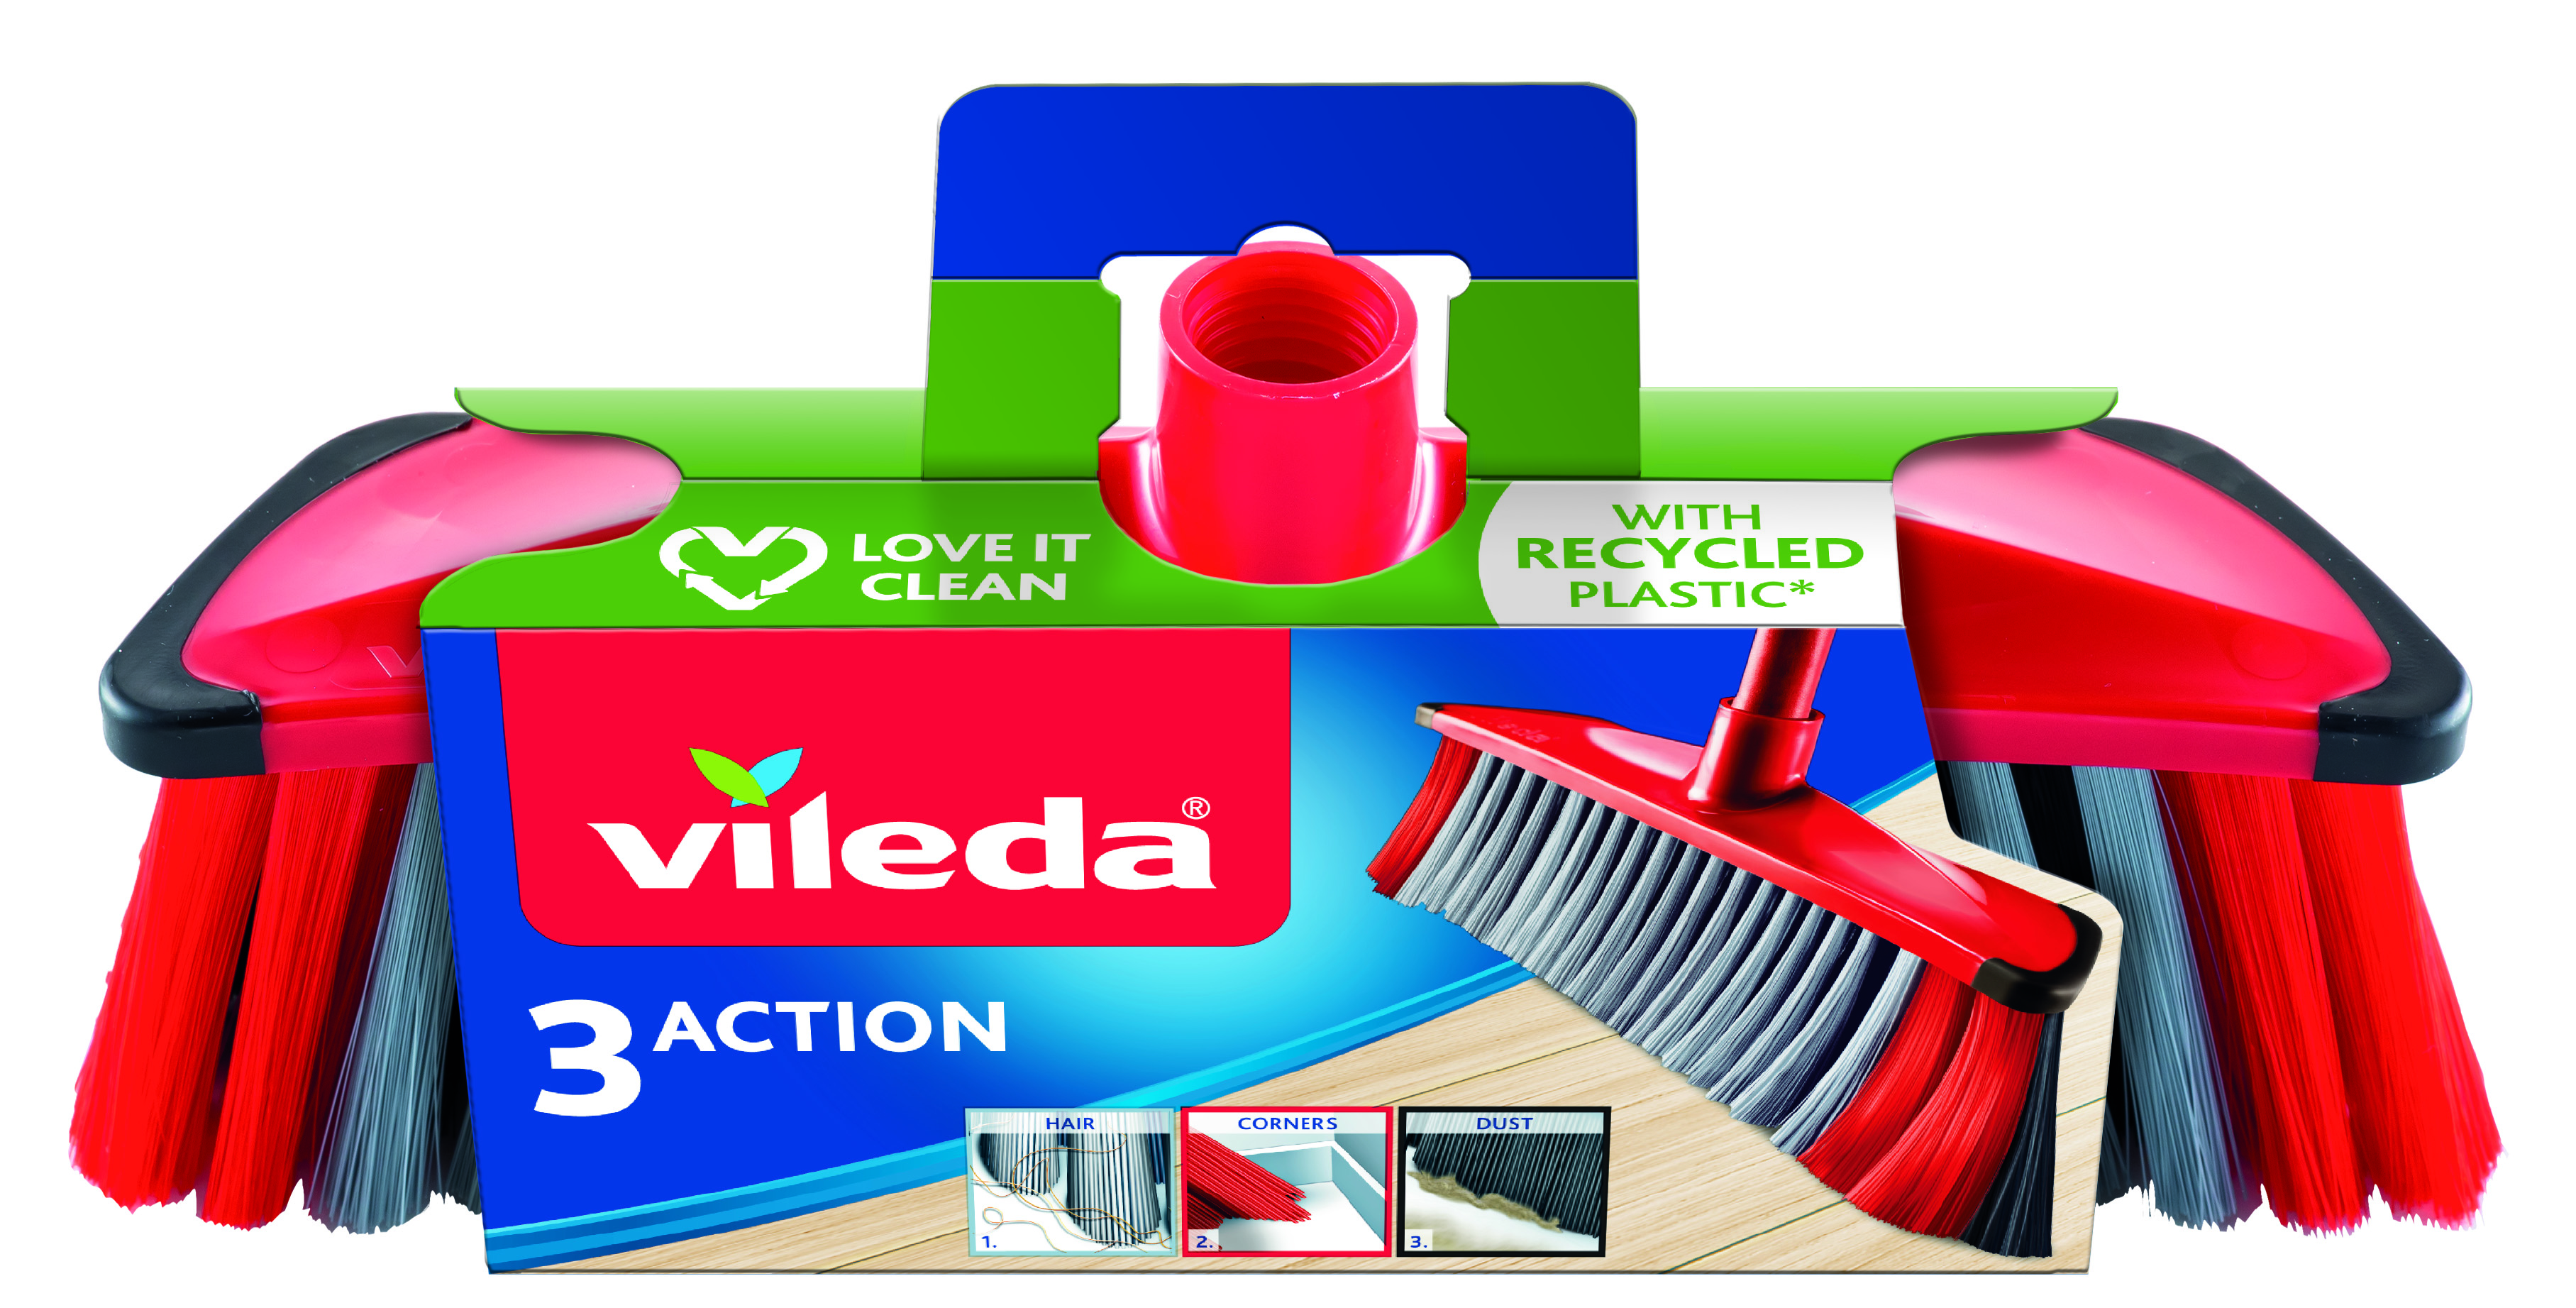 Vileda 3Action – Cleaning broom for everyone